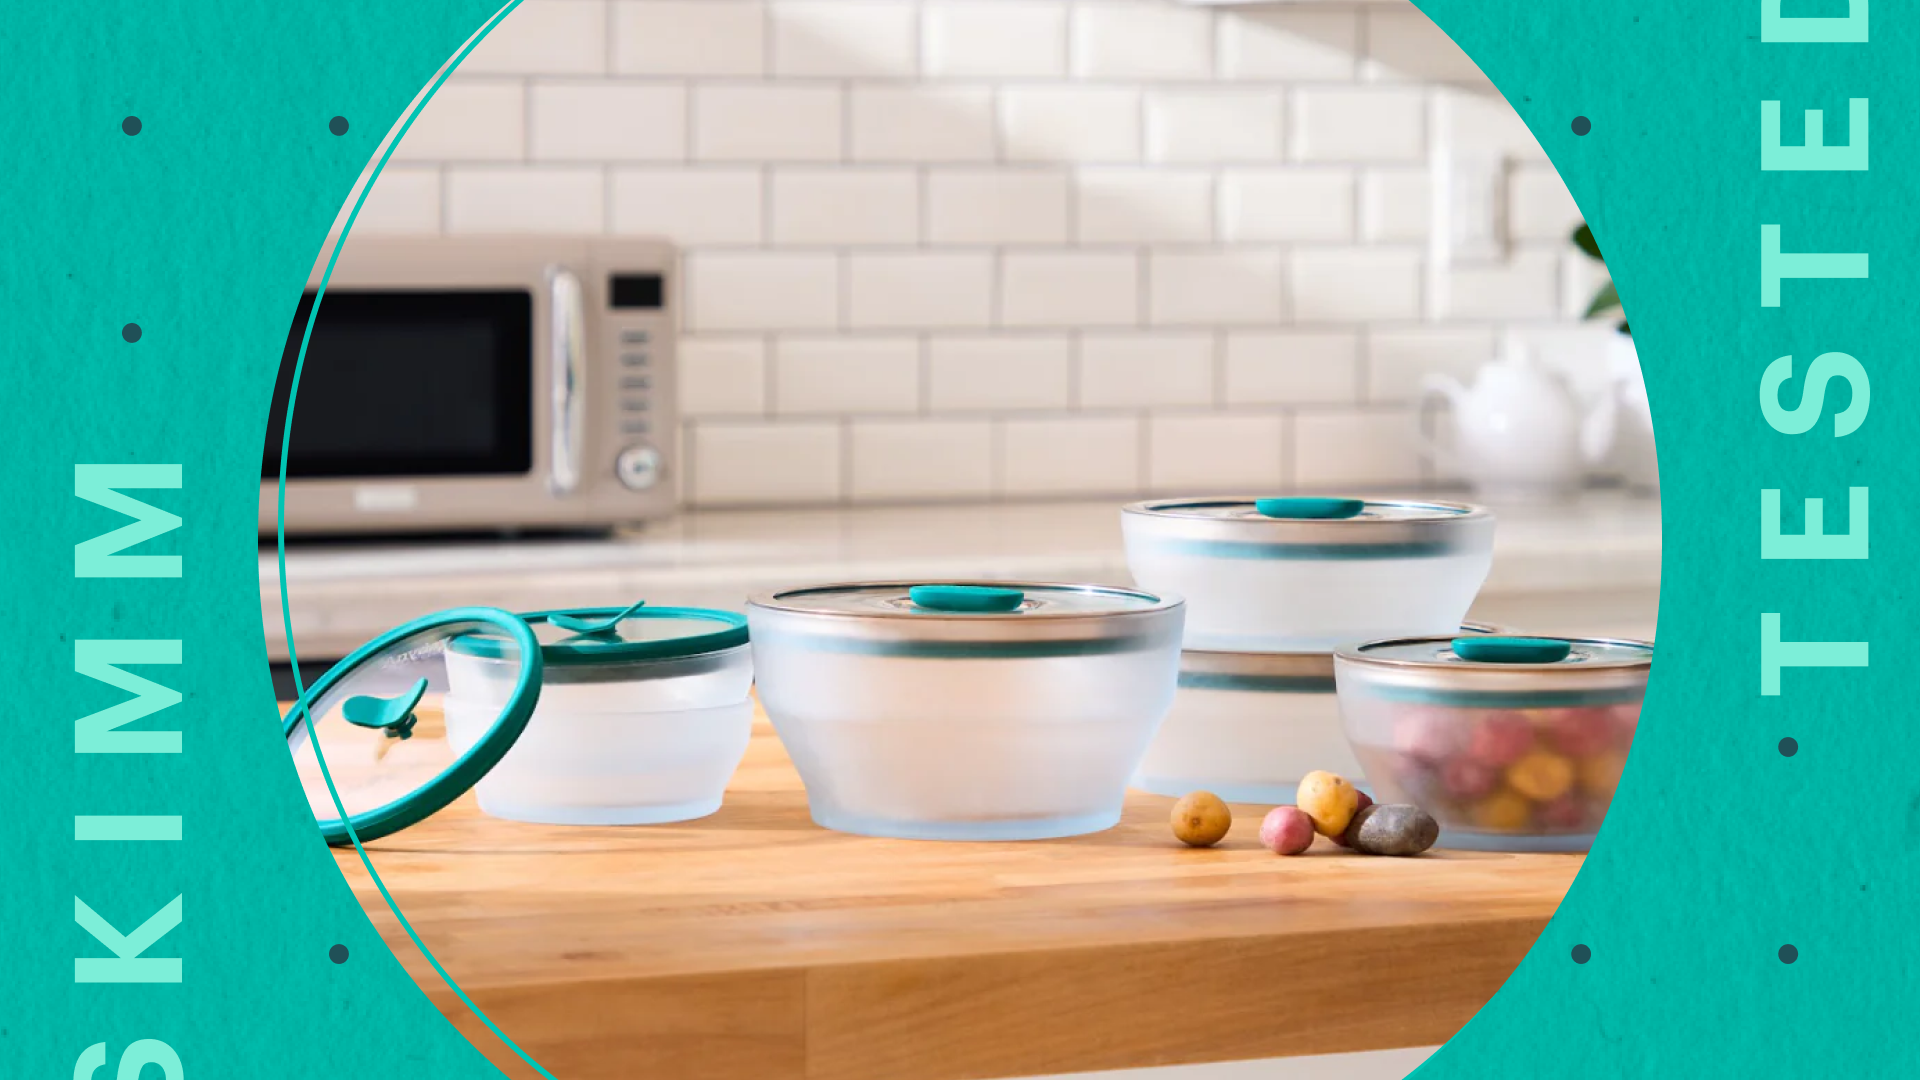 Anyday Cookware Review: Can You Really Cook All Your Meals in the